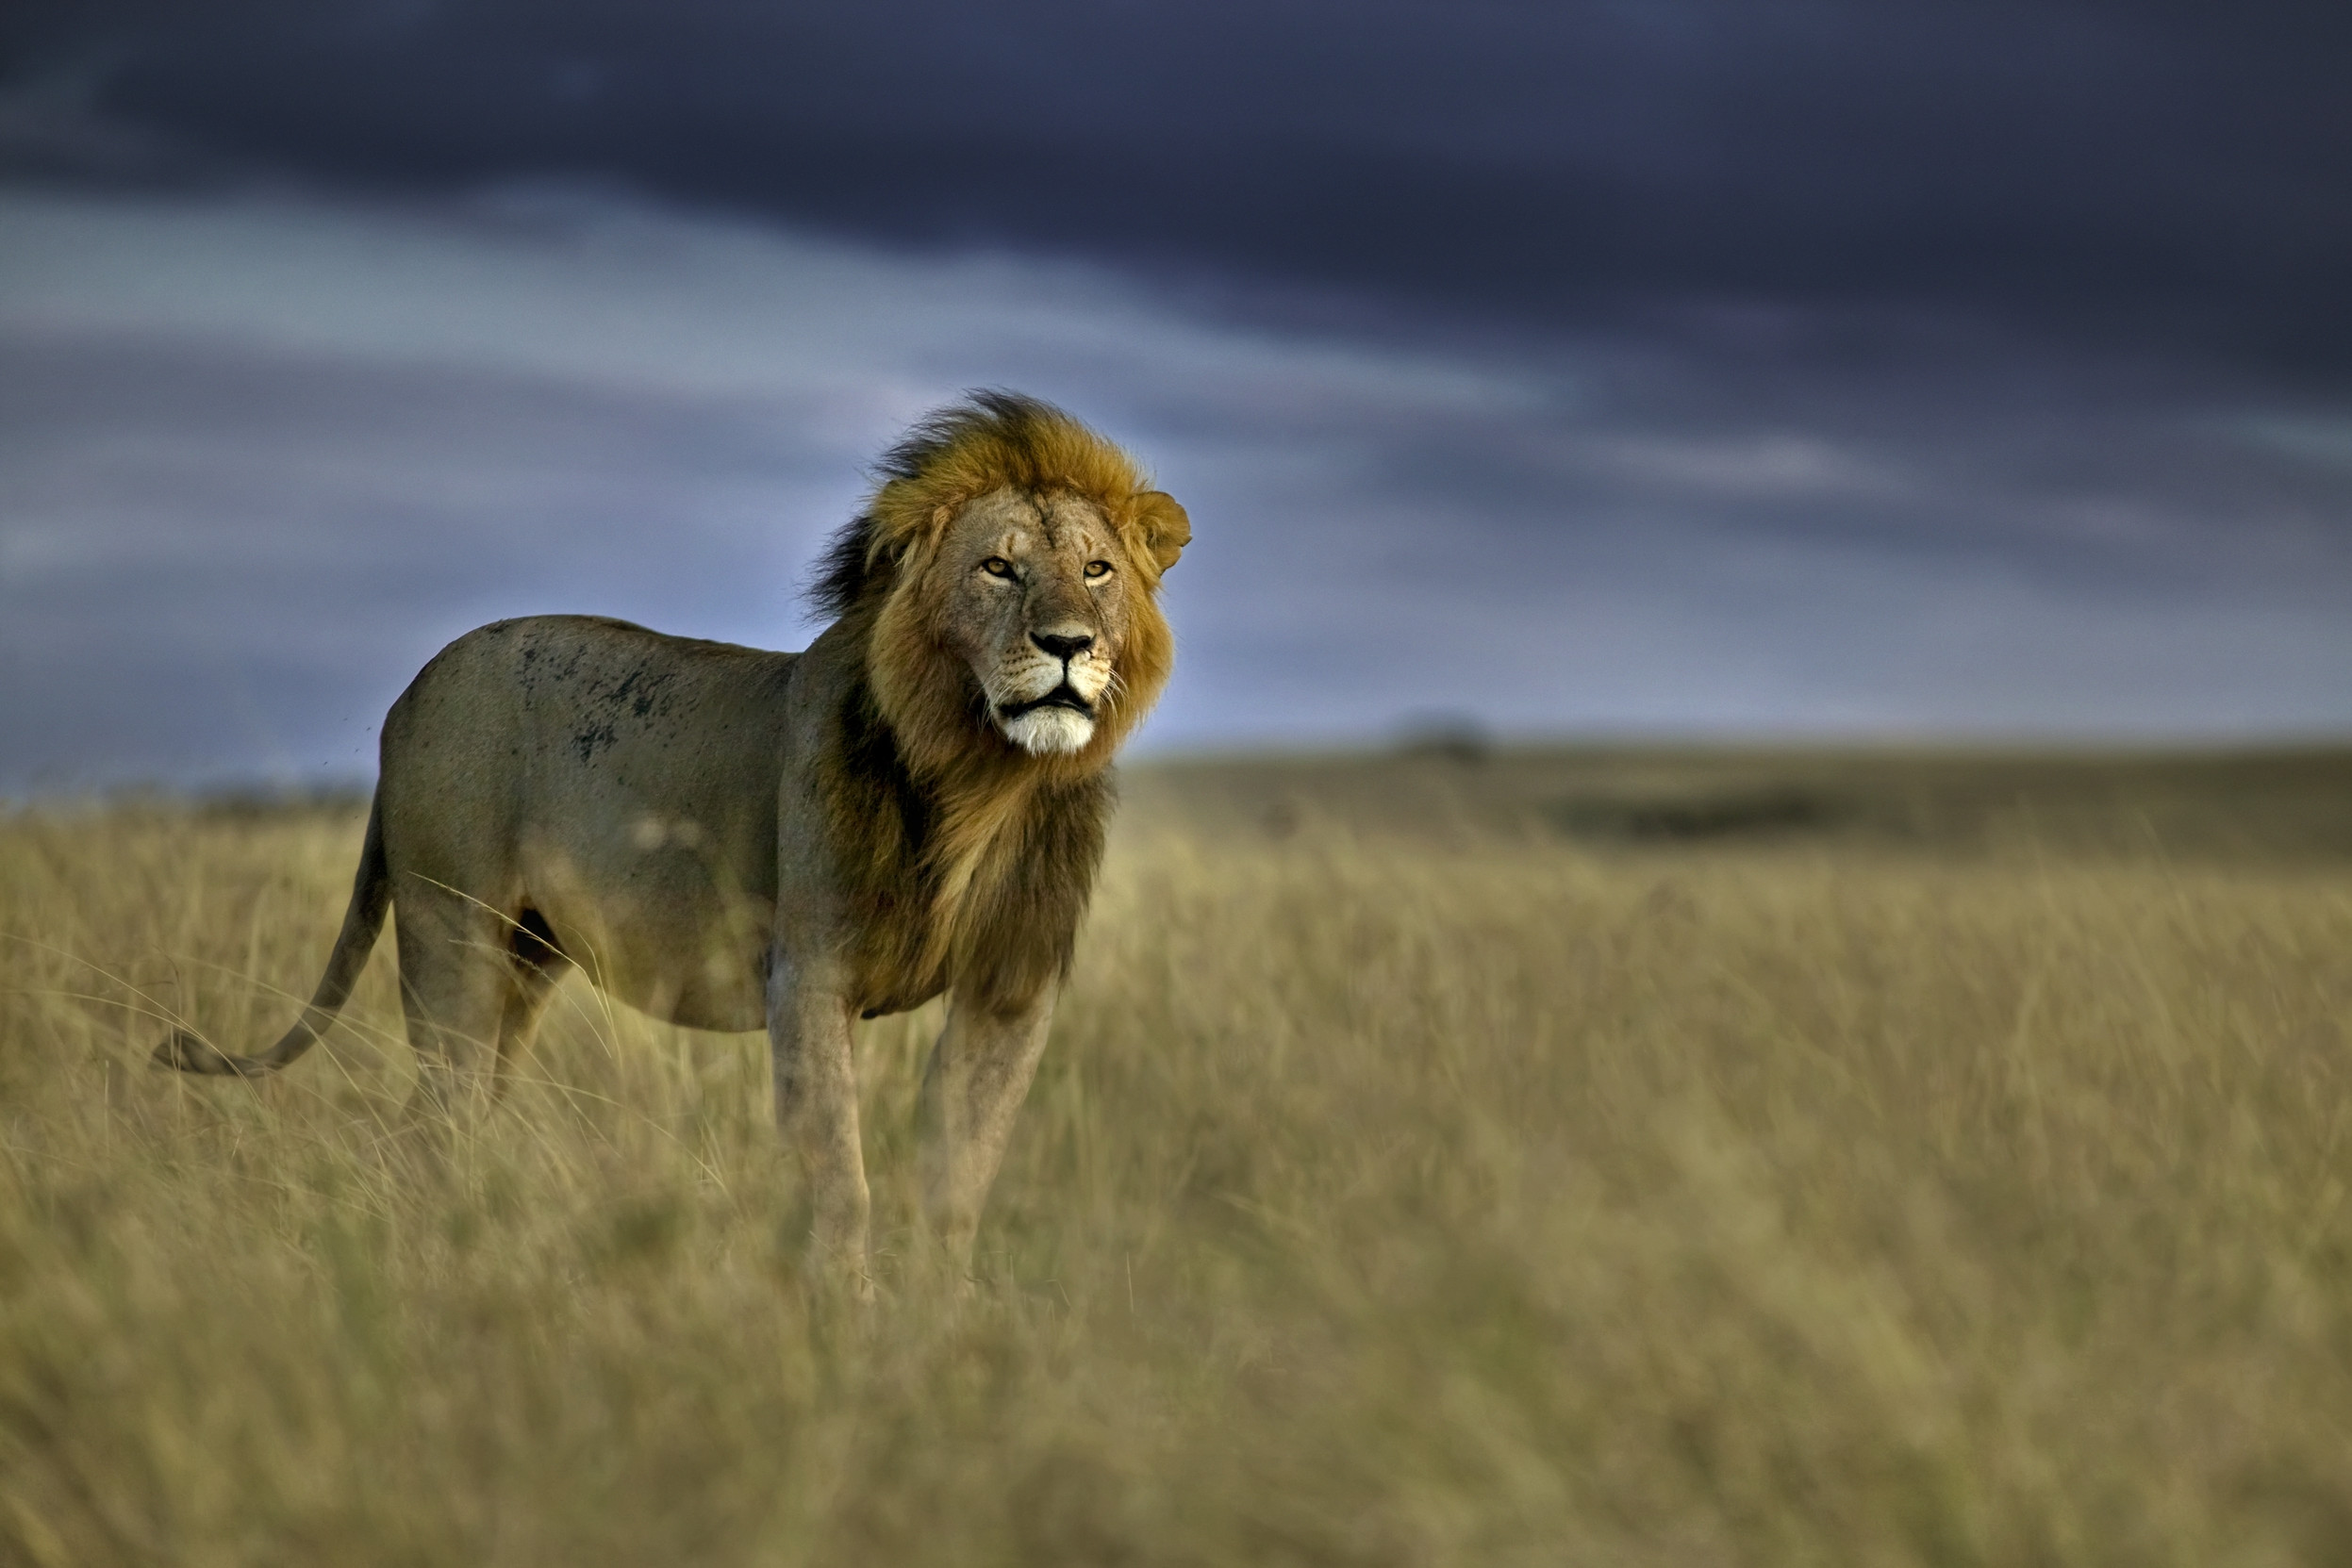 A storm cloud looms behind an adult male lion on the plains of the Masai Mara national reserve in Kenya.